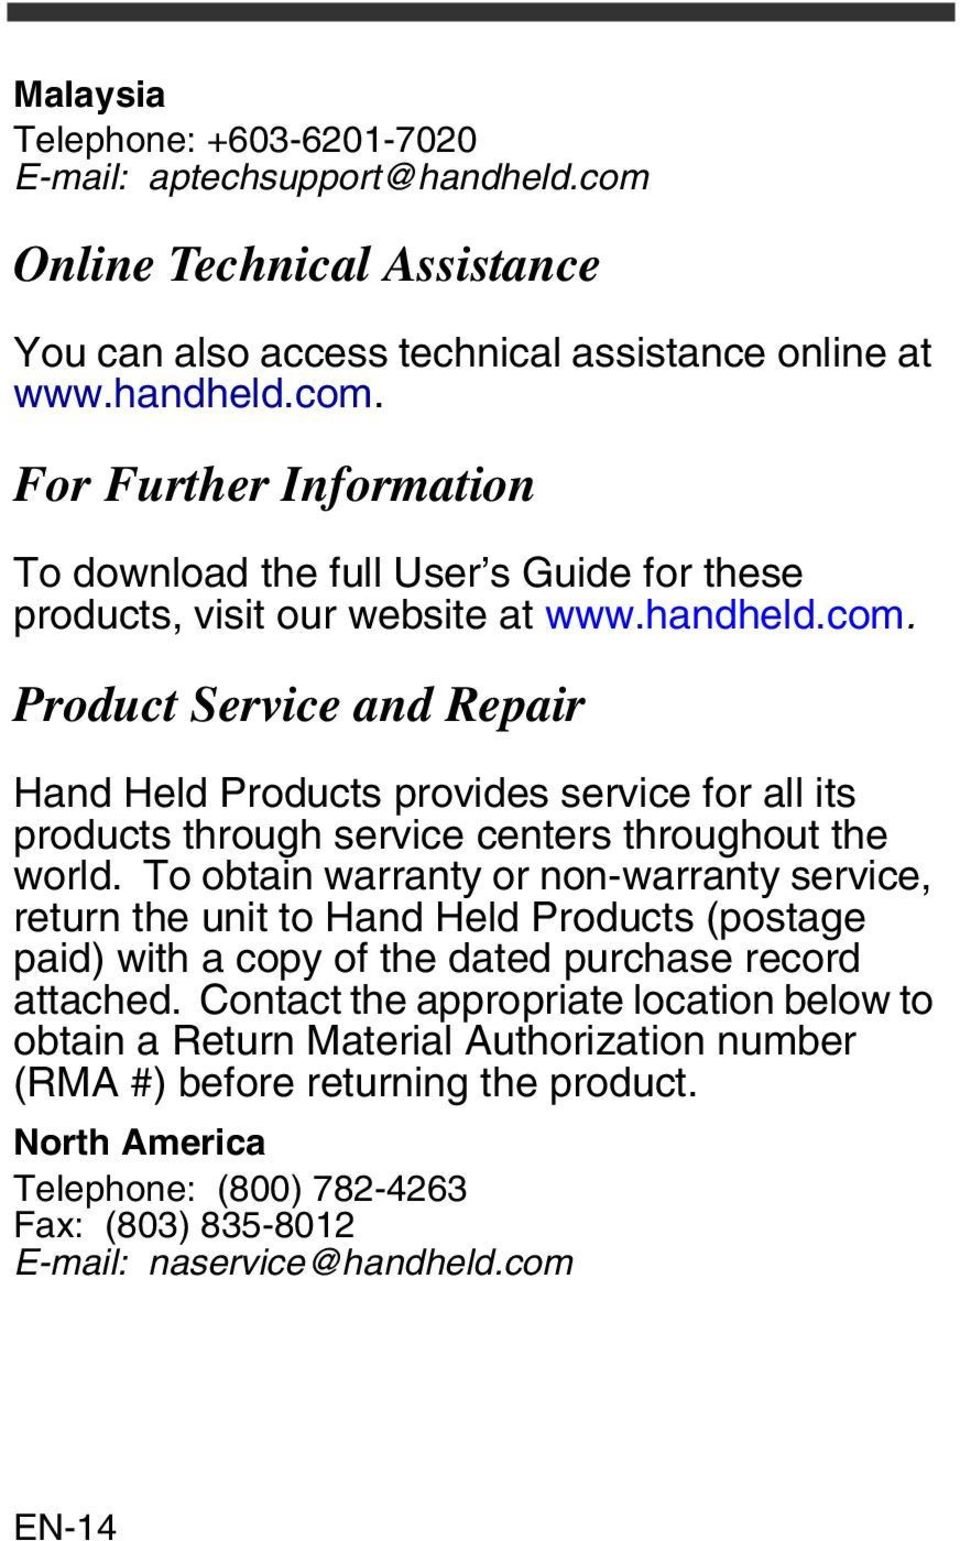 To obtain warranty or non-warranty service, return the unit to Hand Held Products (postage paid) with a copy of the dated purchase record attached.